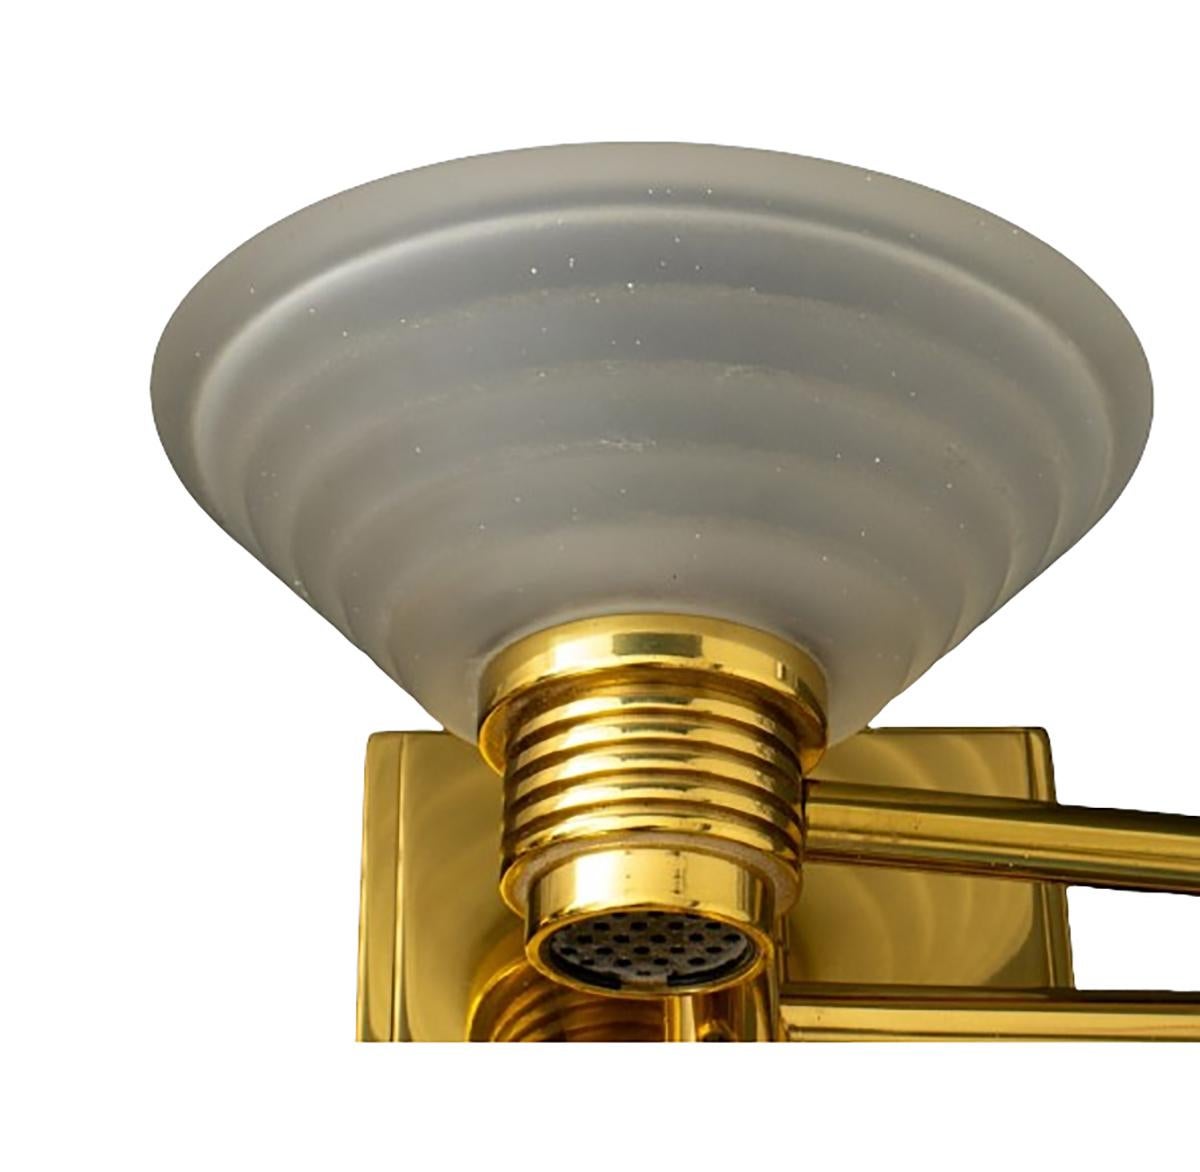 pair of American Post-Modern adjustable gilt metal sconces with frosted glass shades by CSL Lighting. Here are the details:

Style: Post-Modern
Material: Gilt metal
Features:
Adjustable design
Frosted glass shades
Manufacturer: CSL